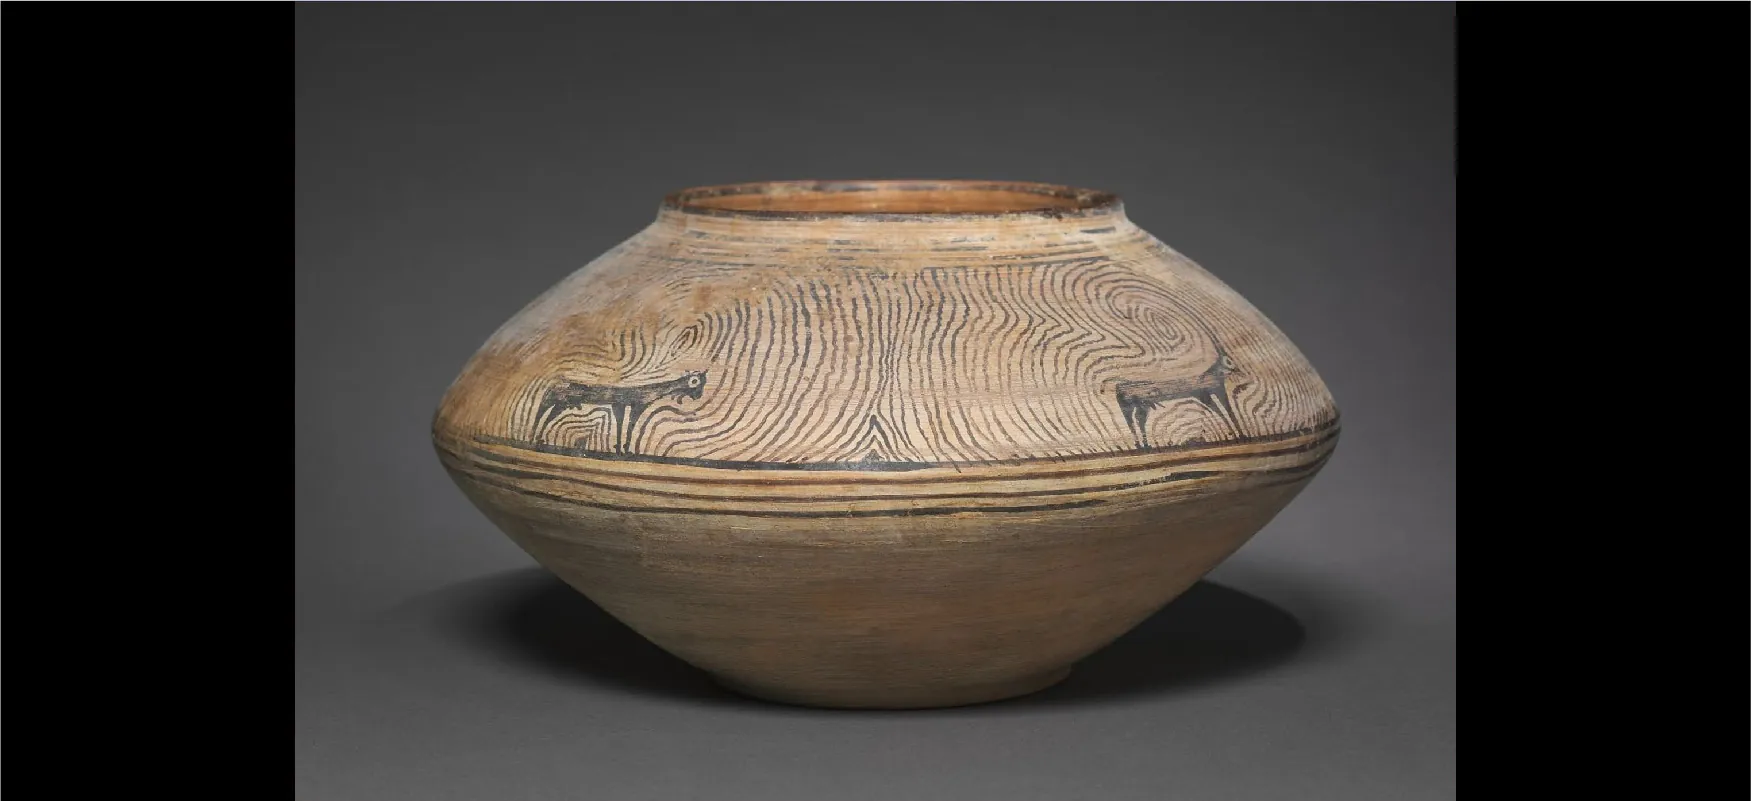 An image of an ancient piece of pottery is shown on a gray background. The item is beige, short, has a round opening at the top, and a thicker middle than the top and bottom. The top is decorated with two black animals with four legs and large white eyes. The horns on top of the head are long and turn into black swirls that cover the top of the item. Four horizonal stripes show in the middle and the lower half of the item is beige with black highlights.